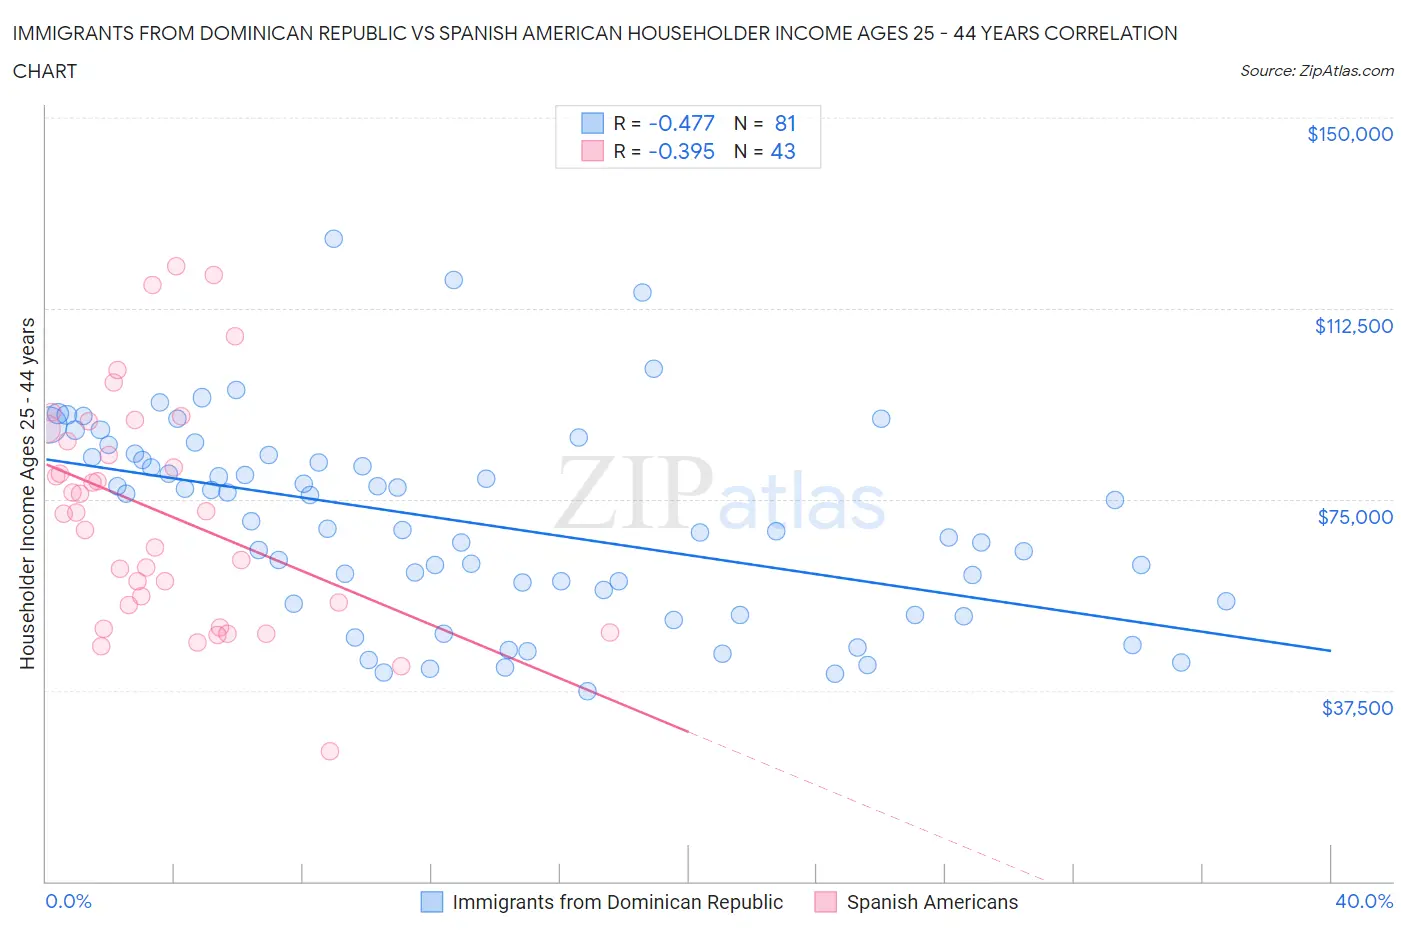 Immigrants from Dominican Republic vs Spanish American Householder Income Ages 25 - 44 years